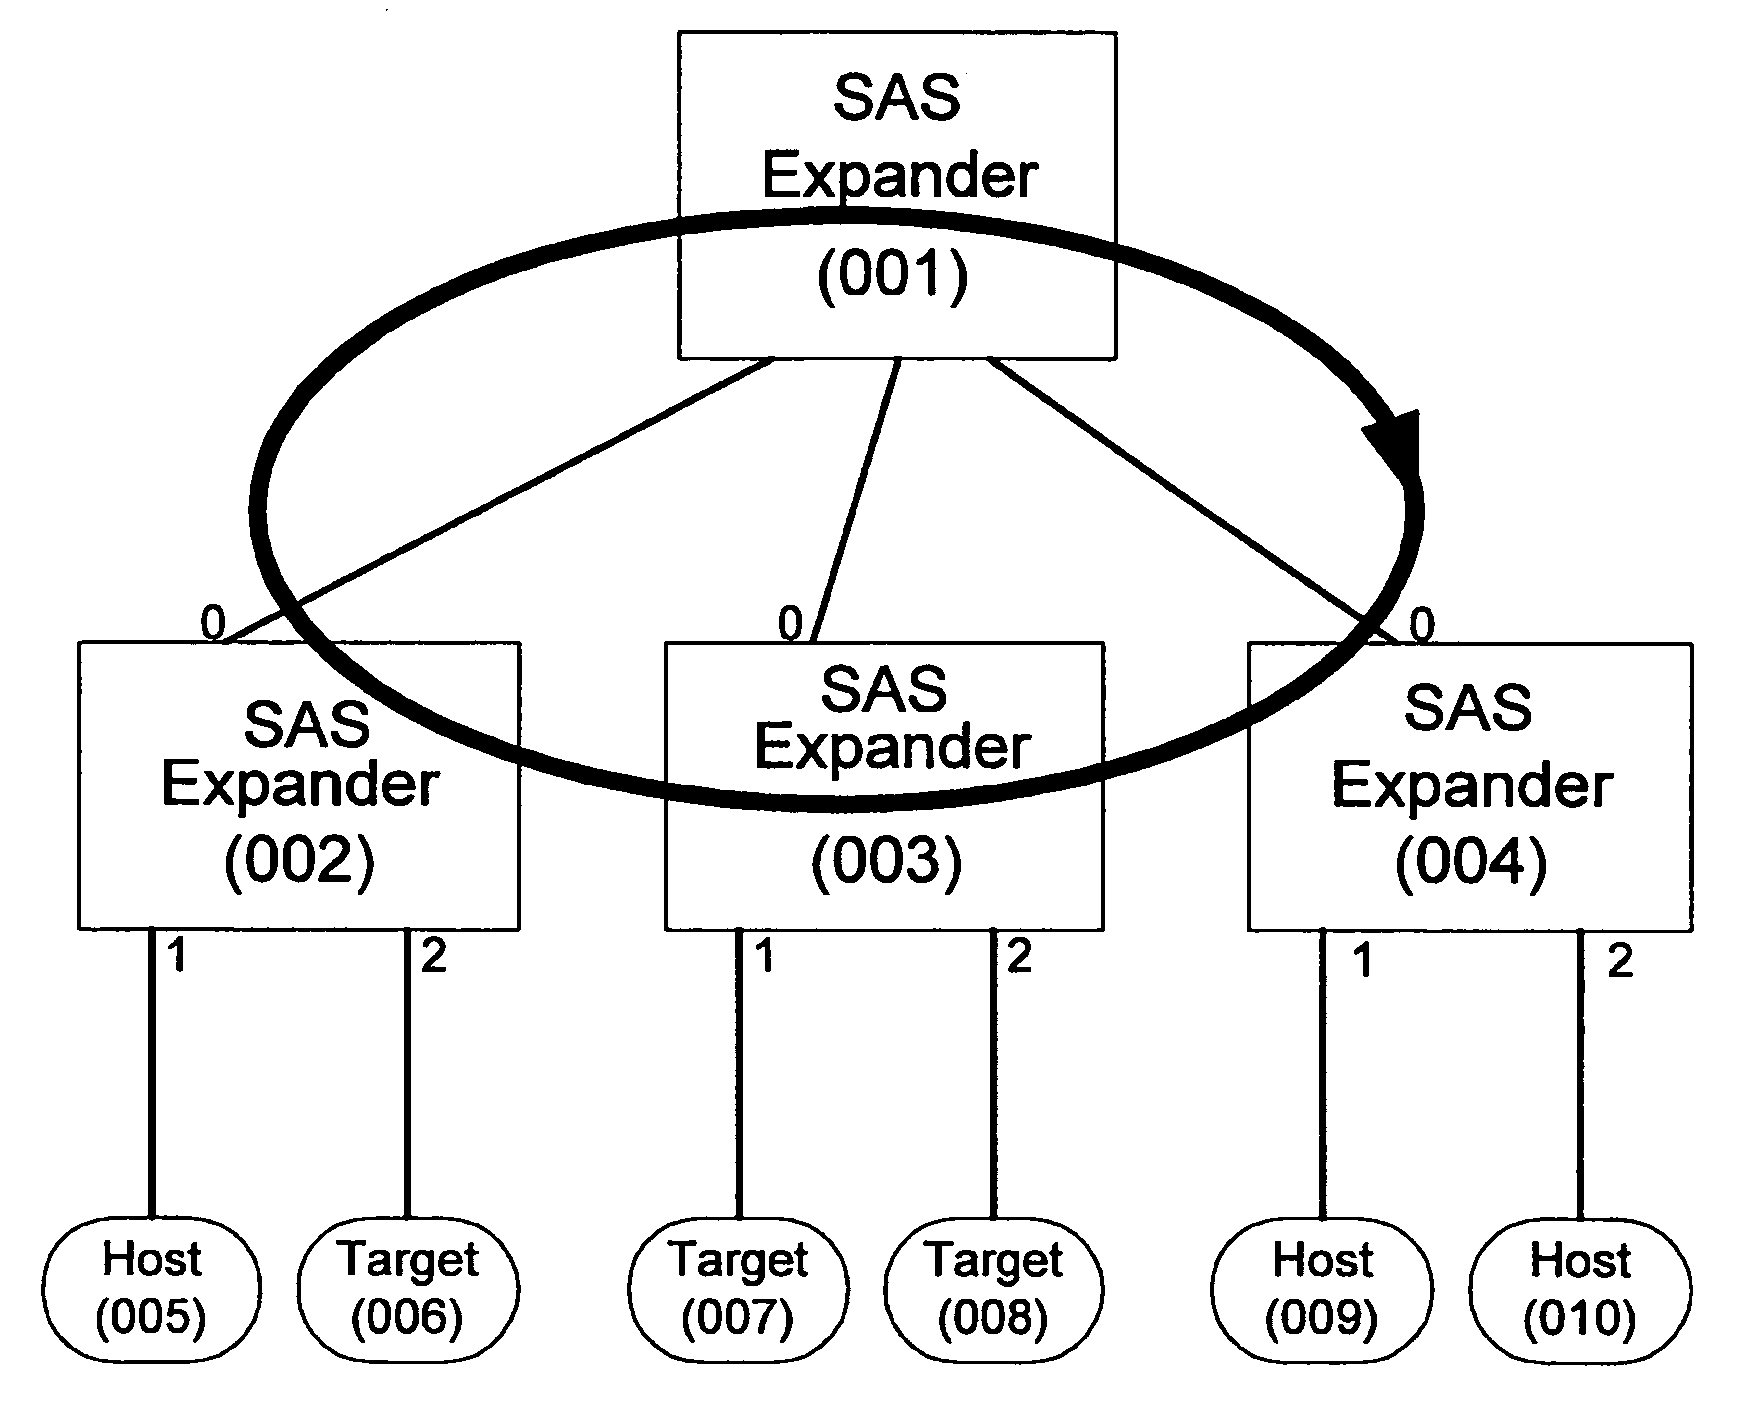 Hierarchical device spin-up control for serial attached devices